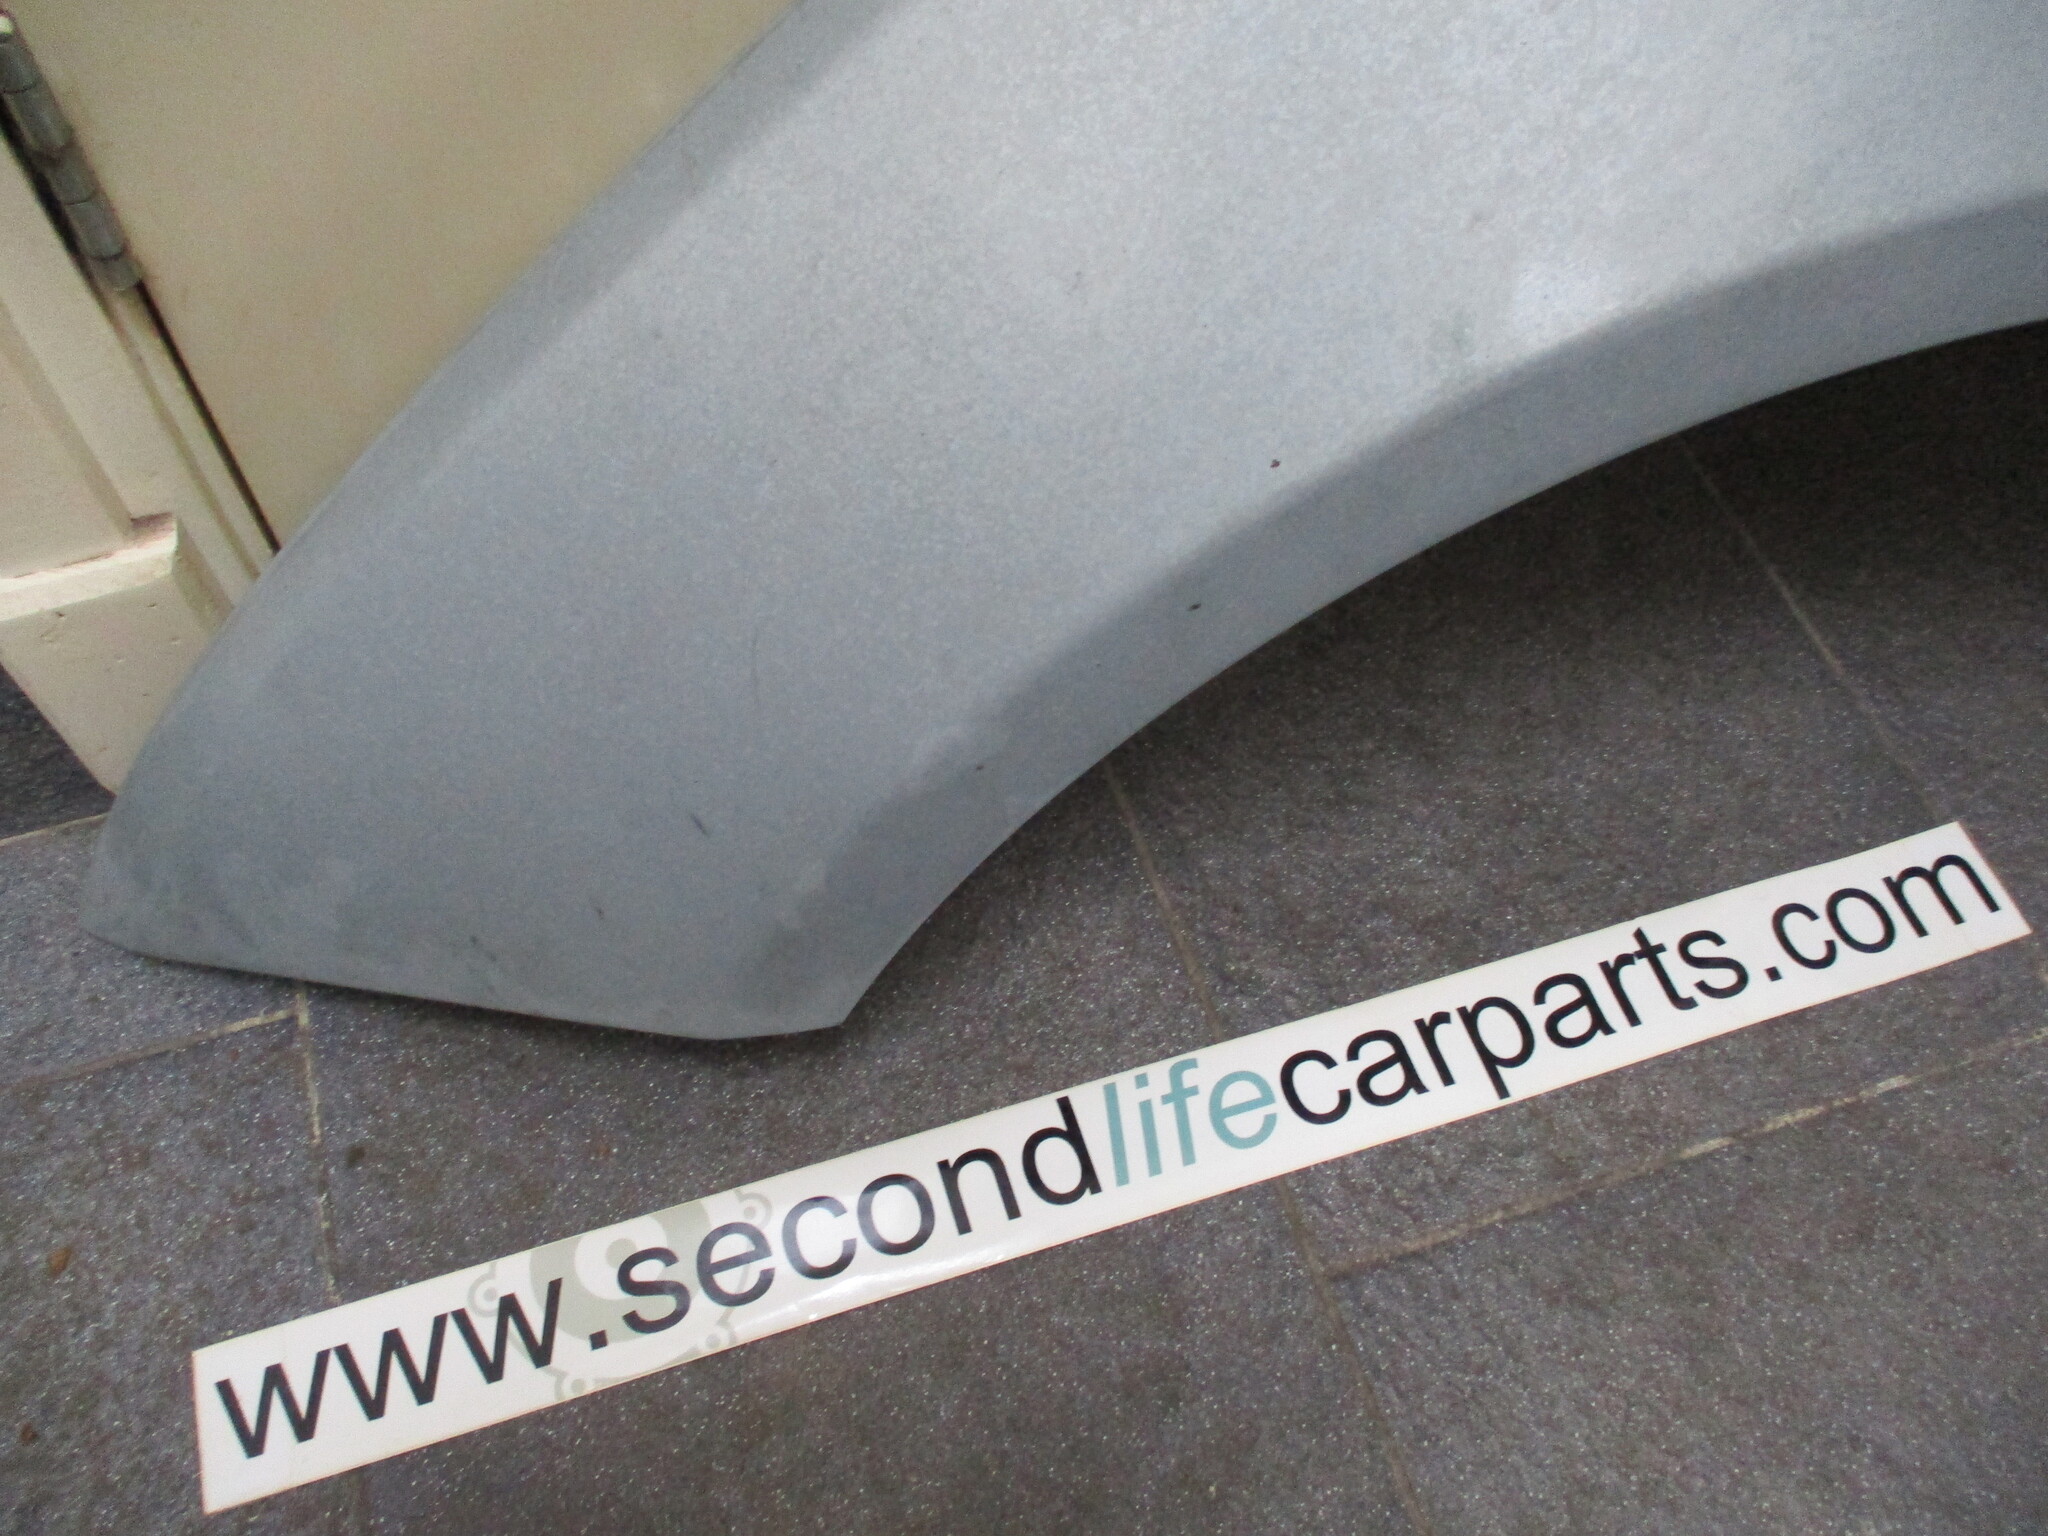 C2Z16959  FRONT Wing LH